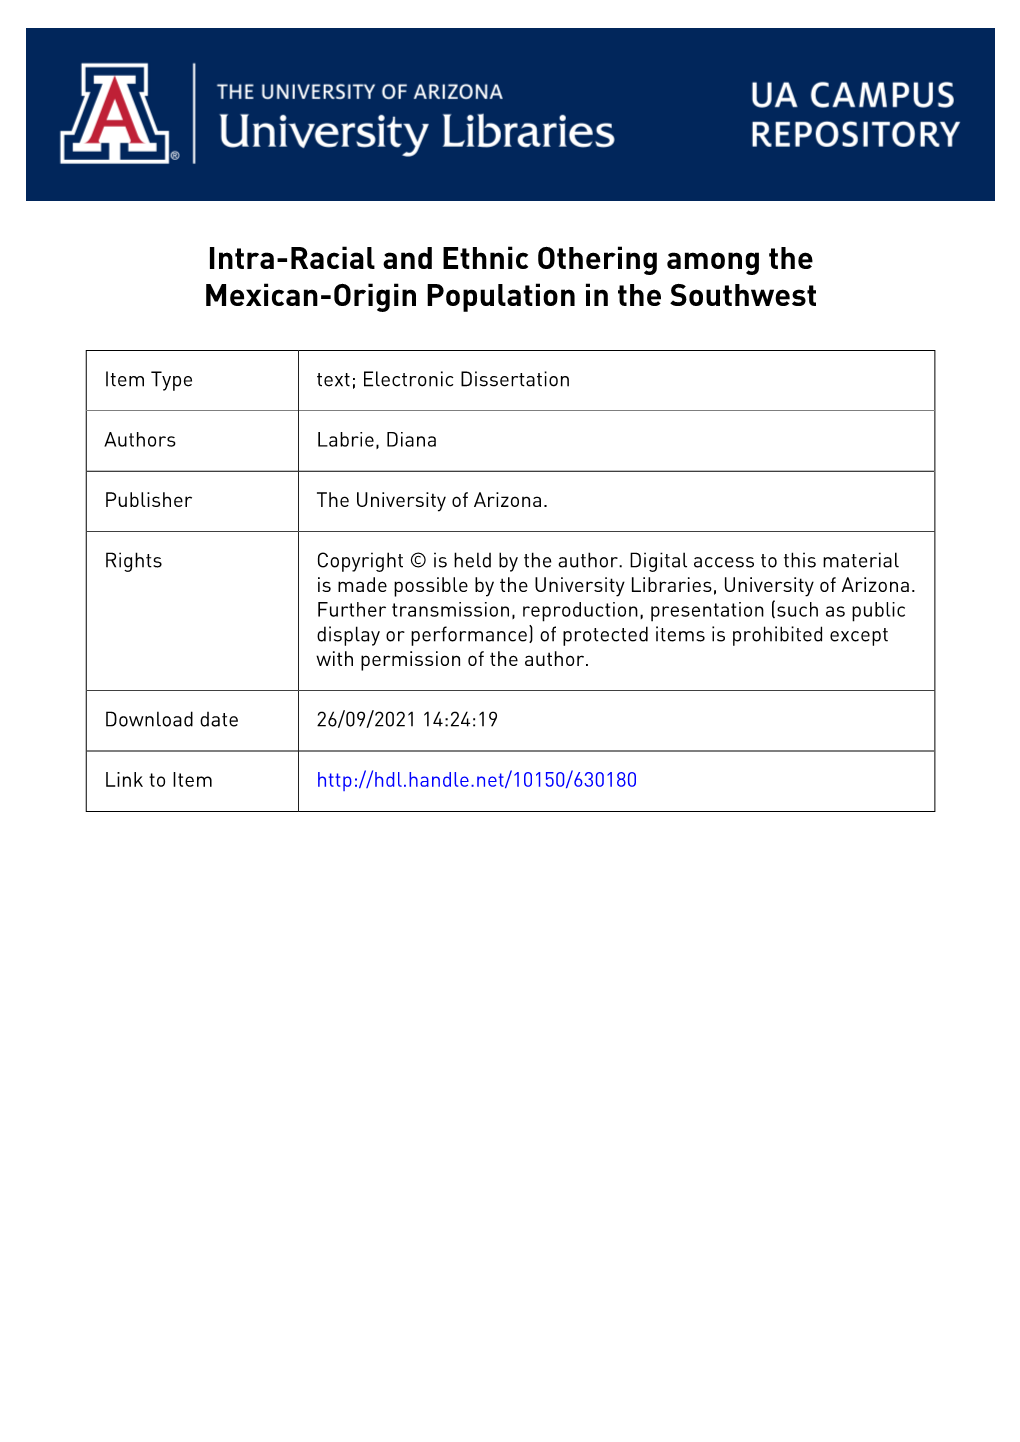 1 Intra-Racial and Ethnic Othering Among The